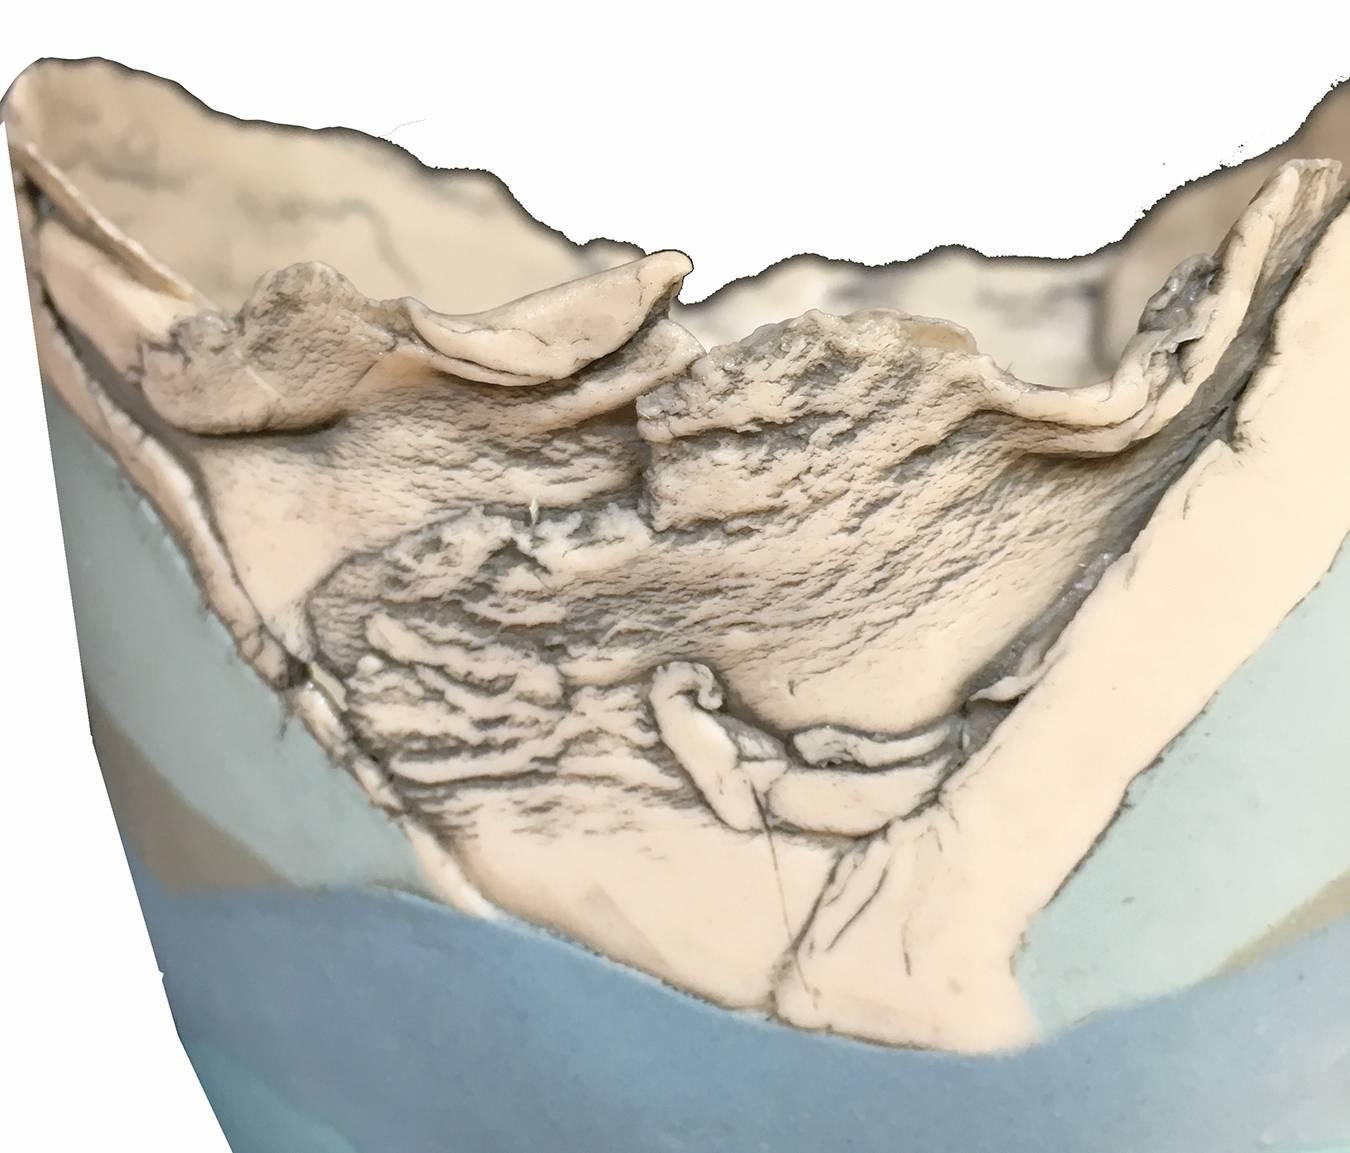 British studio pottery mary white blue, lavender, grey and white vase vessel, of ovate form, the lower section glazed in lilac purple, turquoise, natural white and grey tones, in patches and irregular bands. The area toward the top with an